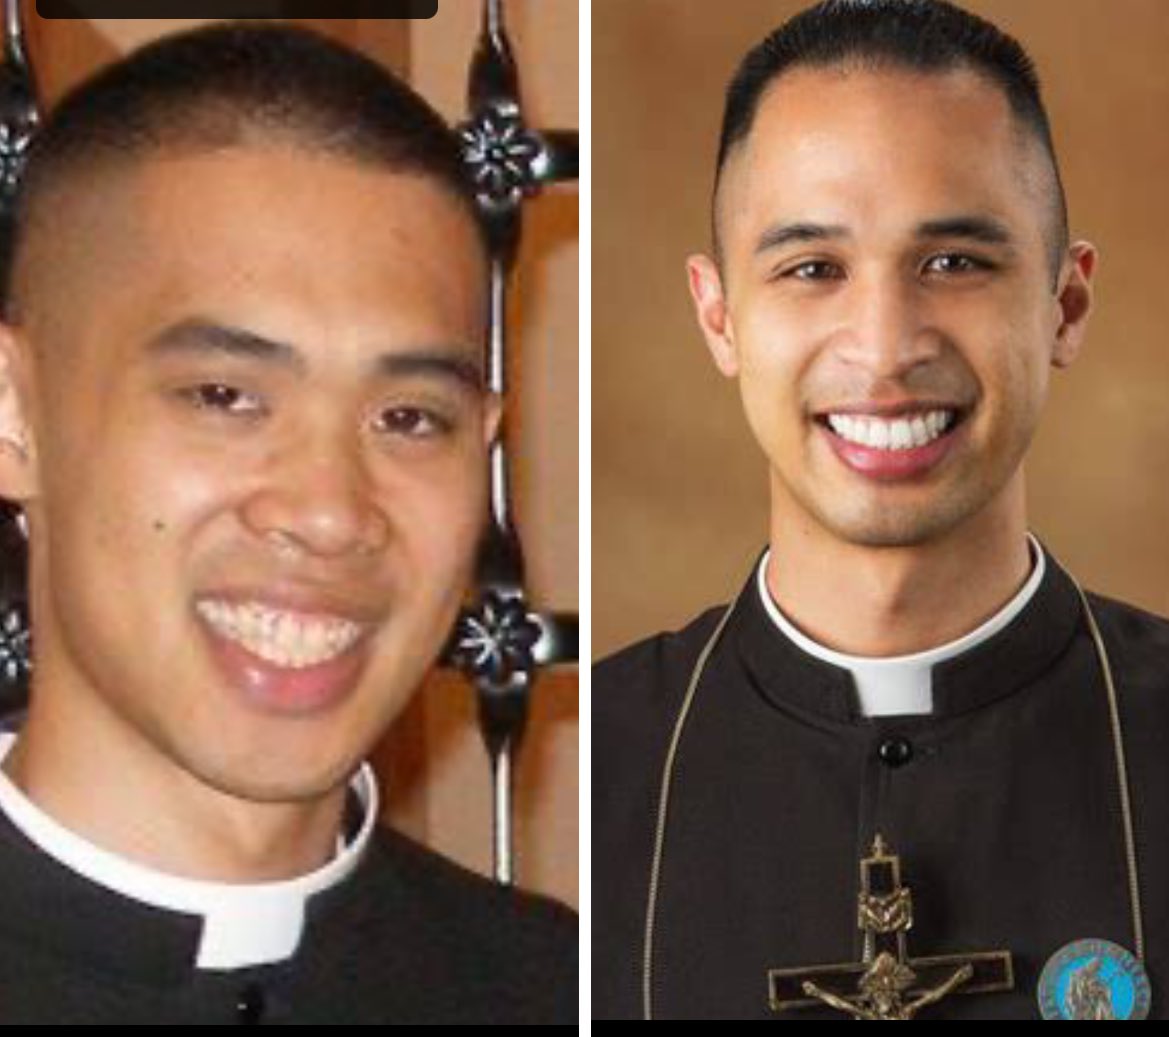 Fathers Joseph and Jewl Aytona are brothers from the same family who belong to the Congregation of the Fathers of Mercy.